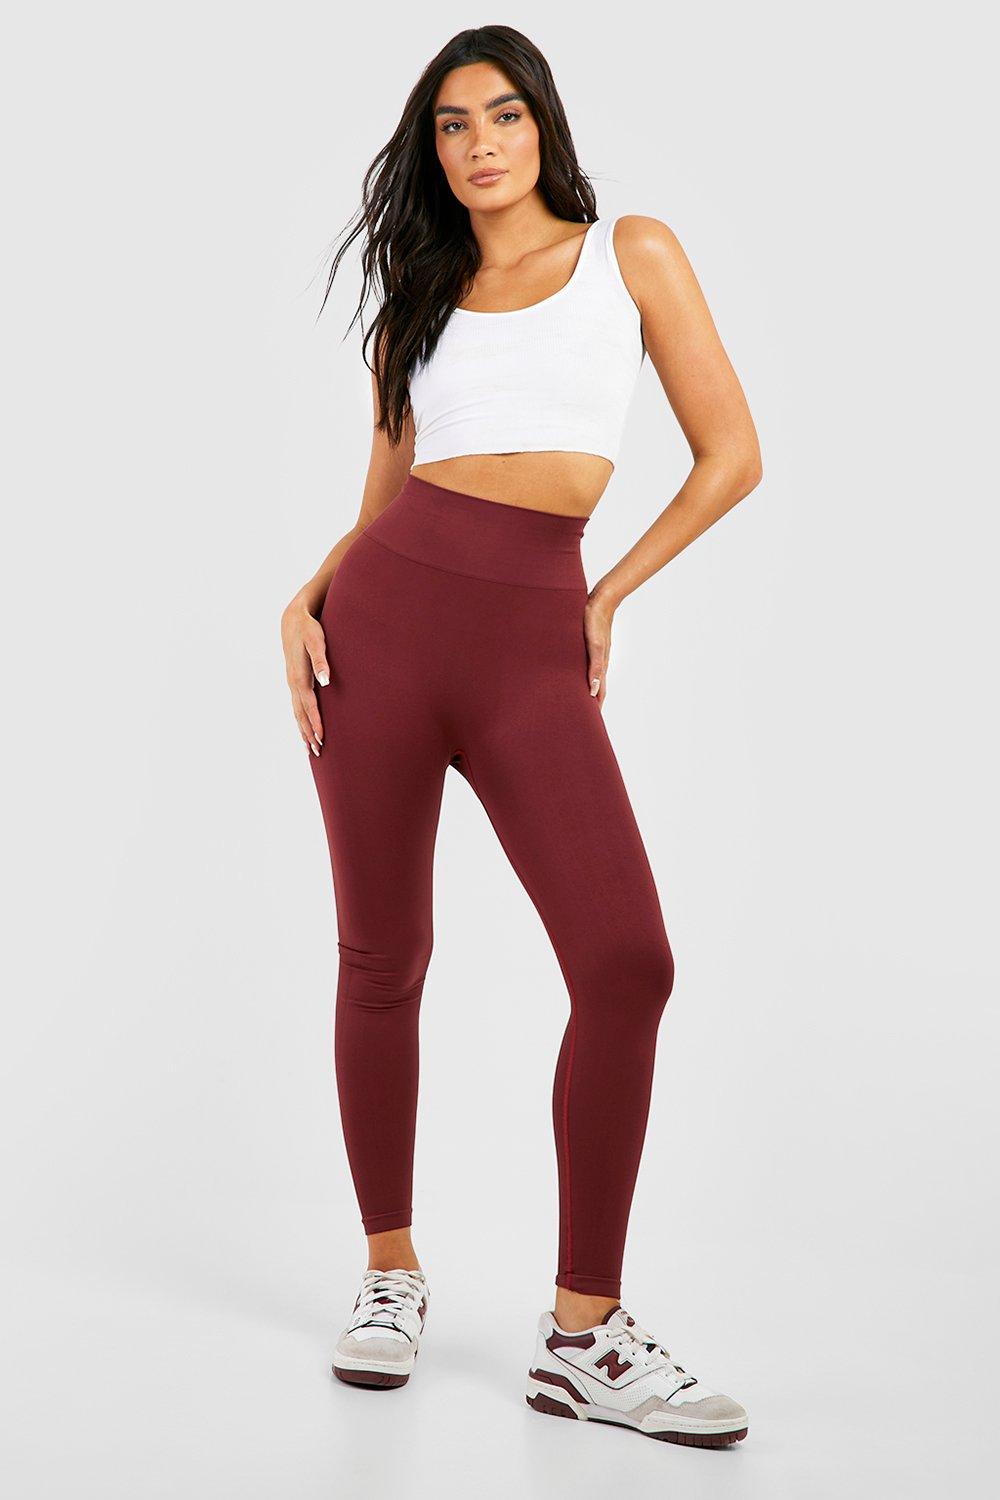 Womens Thick Seamfree Power Gym Leggings - Red - L, Red